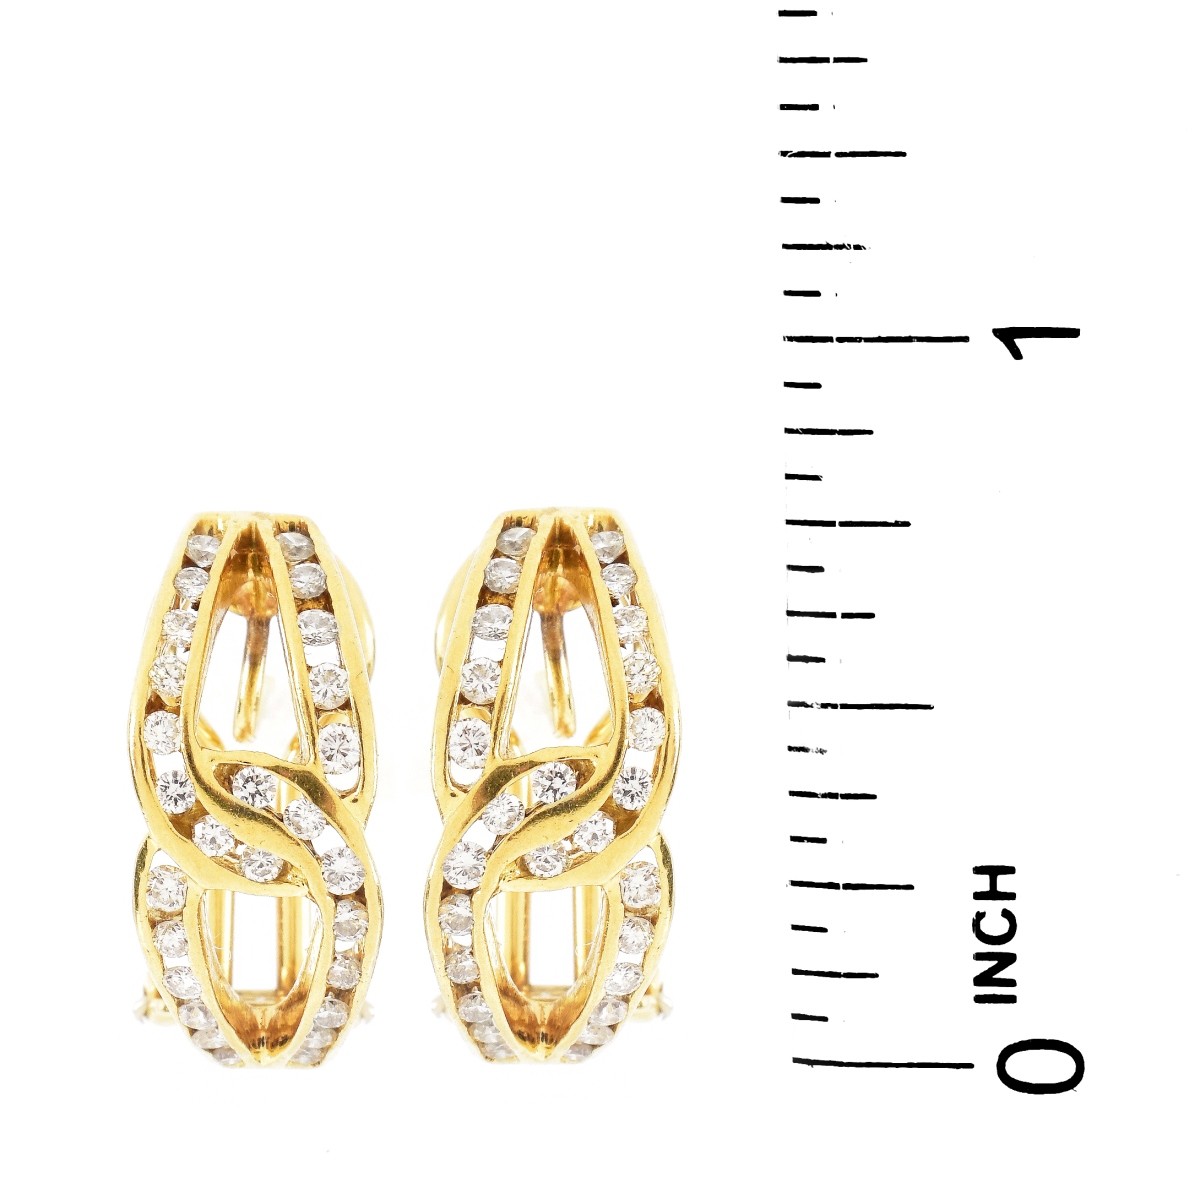 Vintage 1.10ct TW Diamond and 18K Gold Earrings